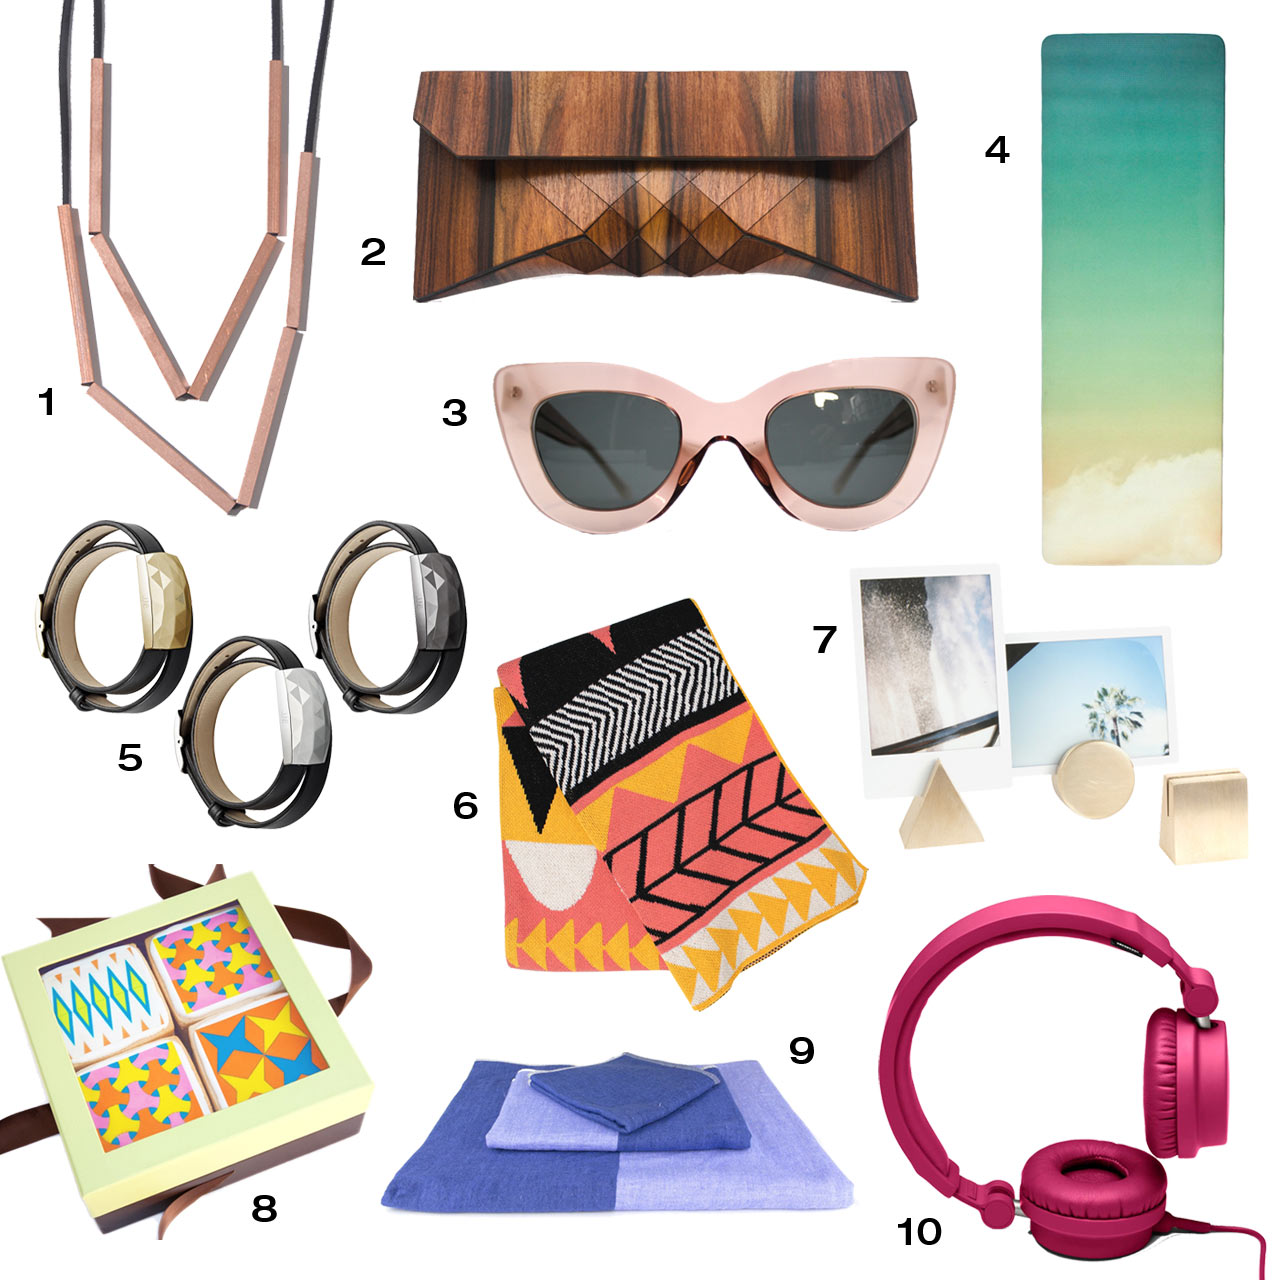 Roundup: 10 Modern Gifts for Mother's Day